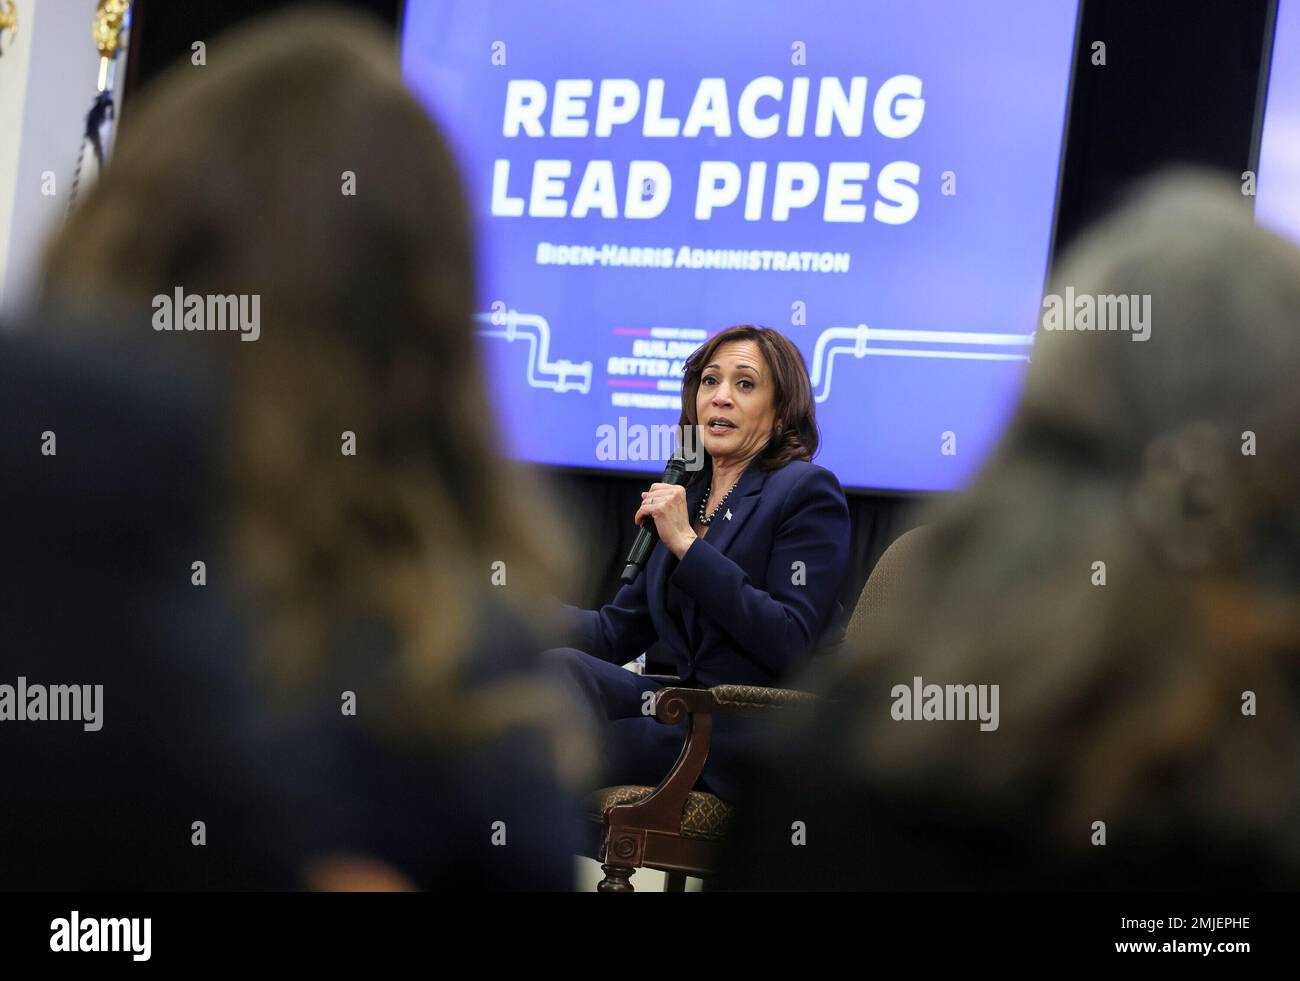 United States Vice President Kamala Harris addresses a gathering of state and local government officials, labor leaders and NGOs from across the U.S. during an Accelerating Lead Pipe Replacement Summit at The White House on Friday January 27, 2023 in Washington D.C. Credit: Jemal Countess / Pool via CNP Stock Photo